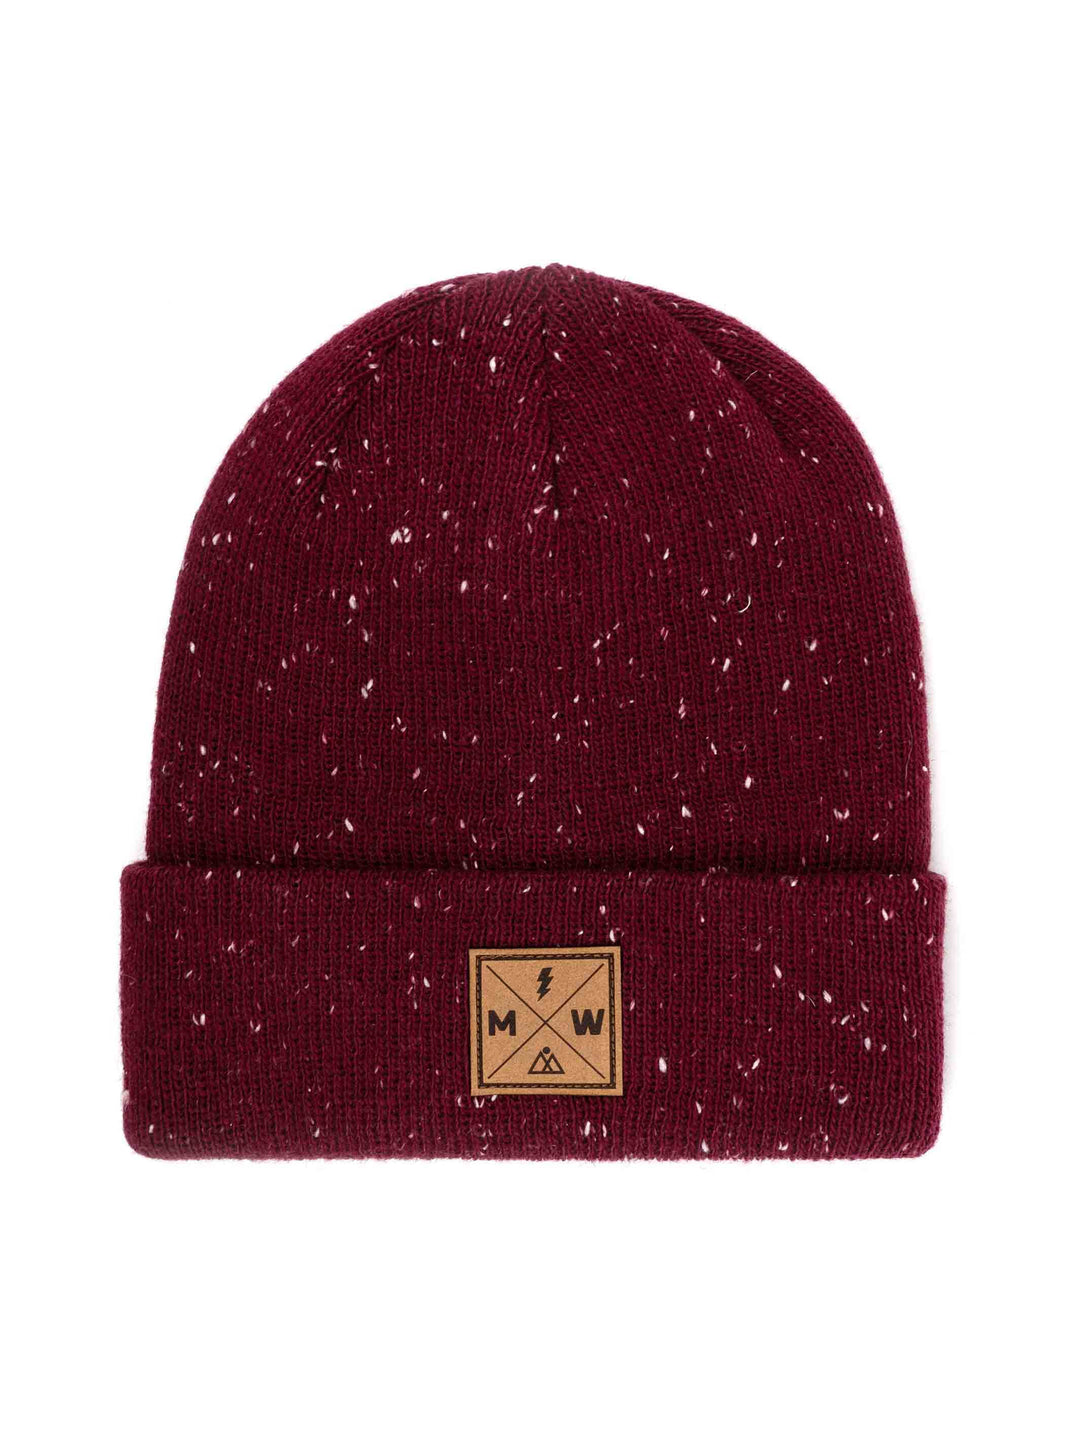 Milk X Whiskey - Powered by Nature - Daily Pine Beanie - Cabernet